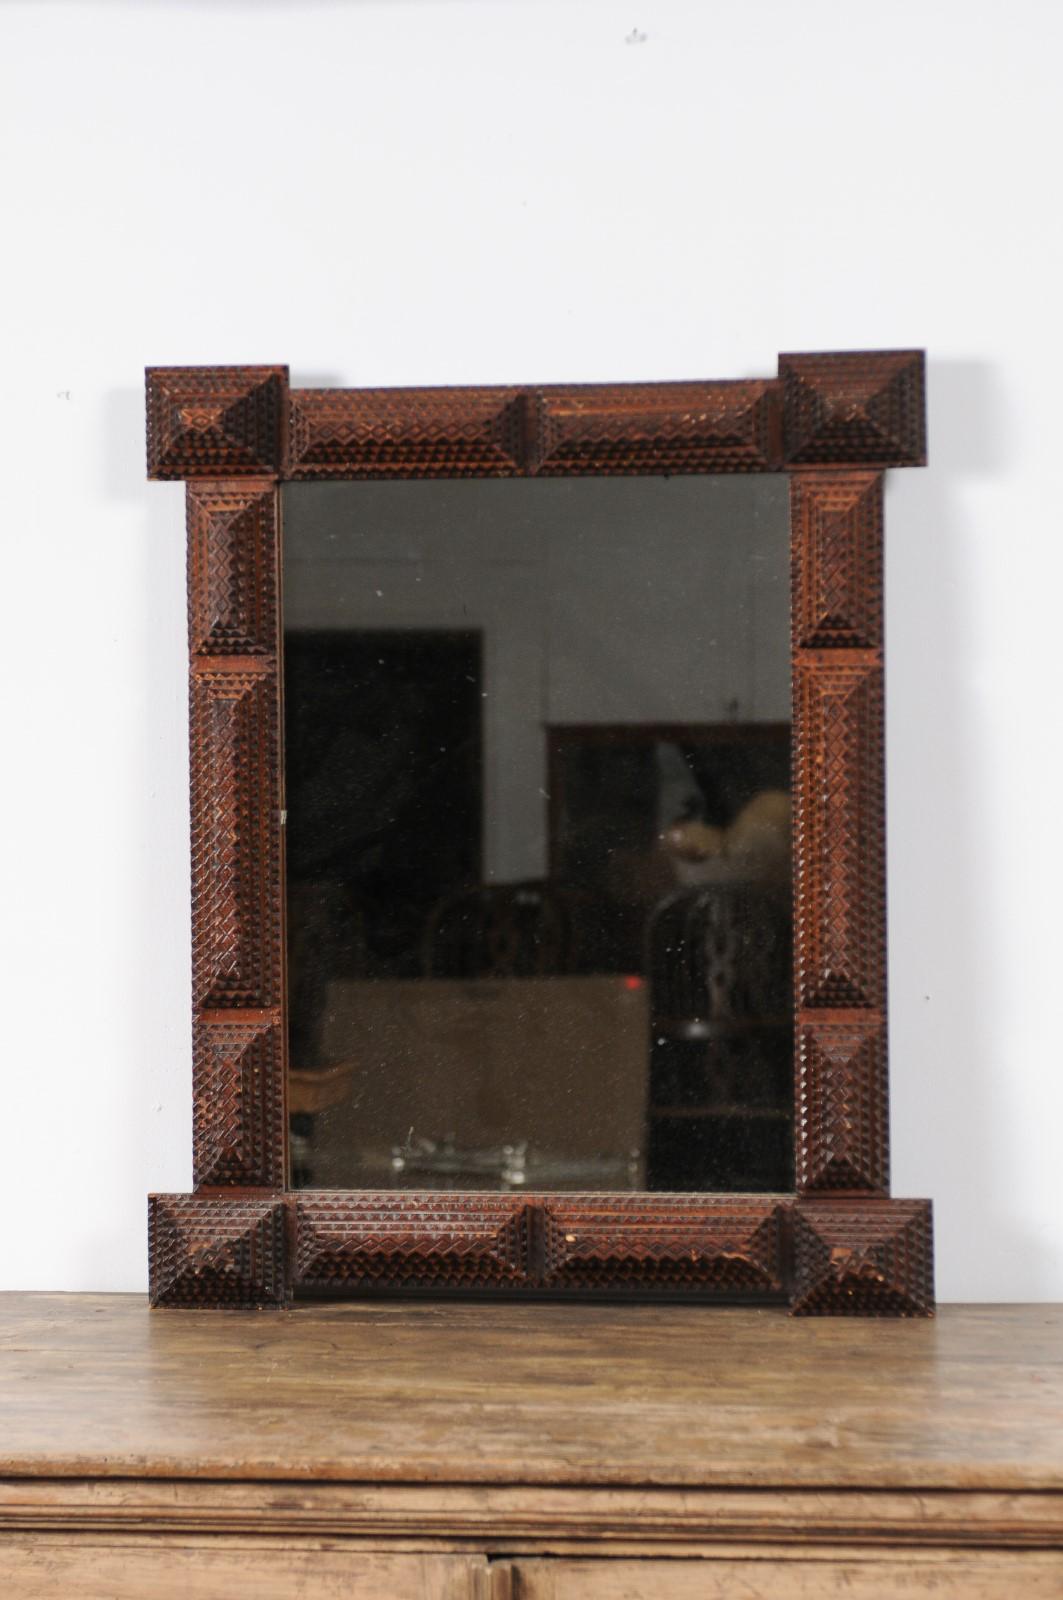 A French Tramp Art hand carved mirror from the Turn of the century, with pyramidal motifs. Born in the early years of the 20th century, this charming wall mirror was hand carved in the manner typical of the Tramp Art style. Presenting a linear